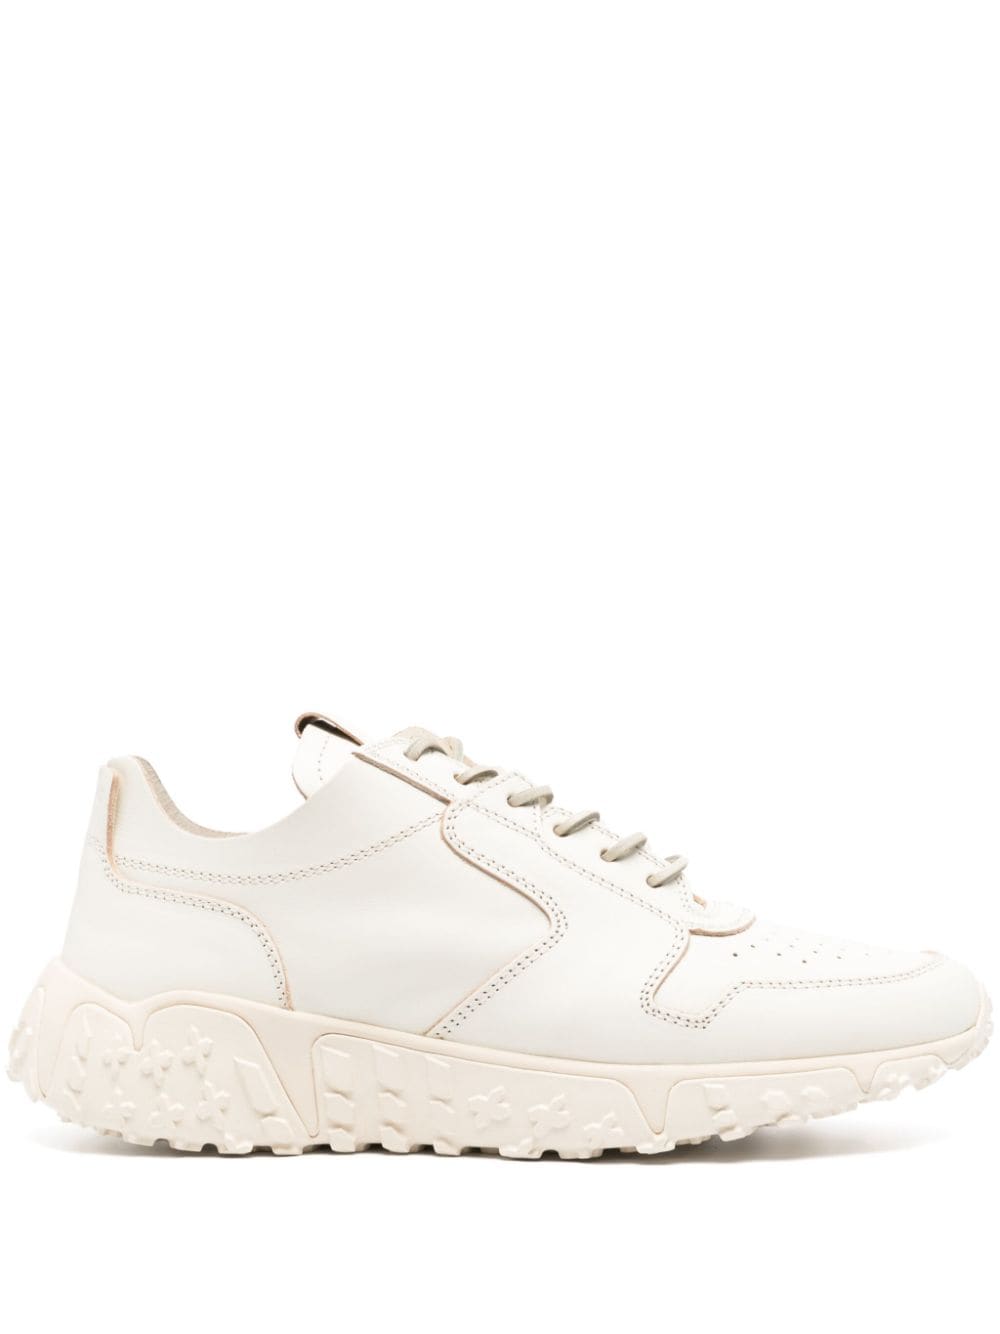 Buttero lace-up leather sneakers - White von Buttero